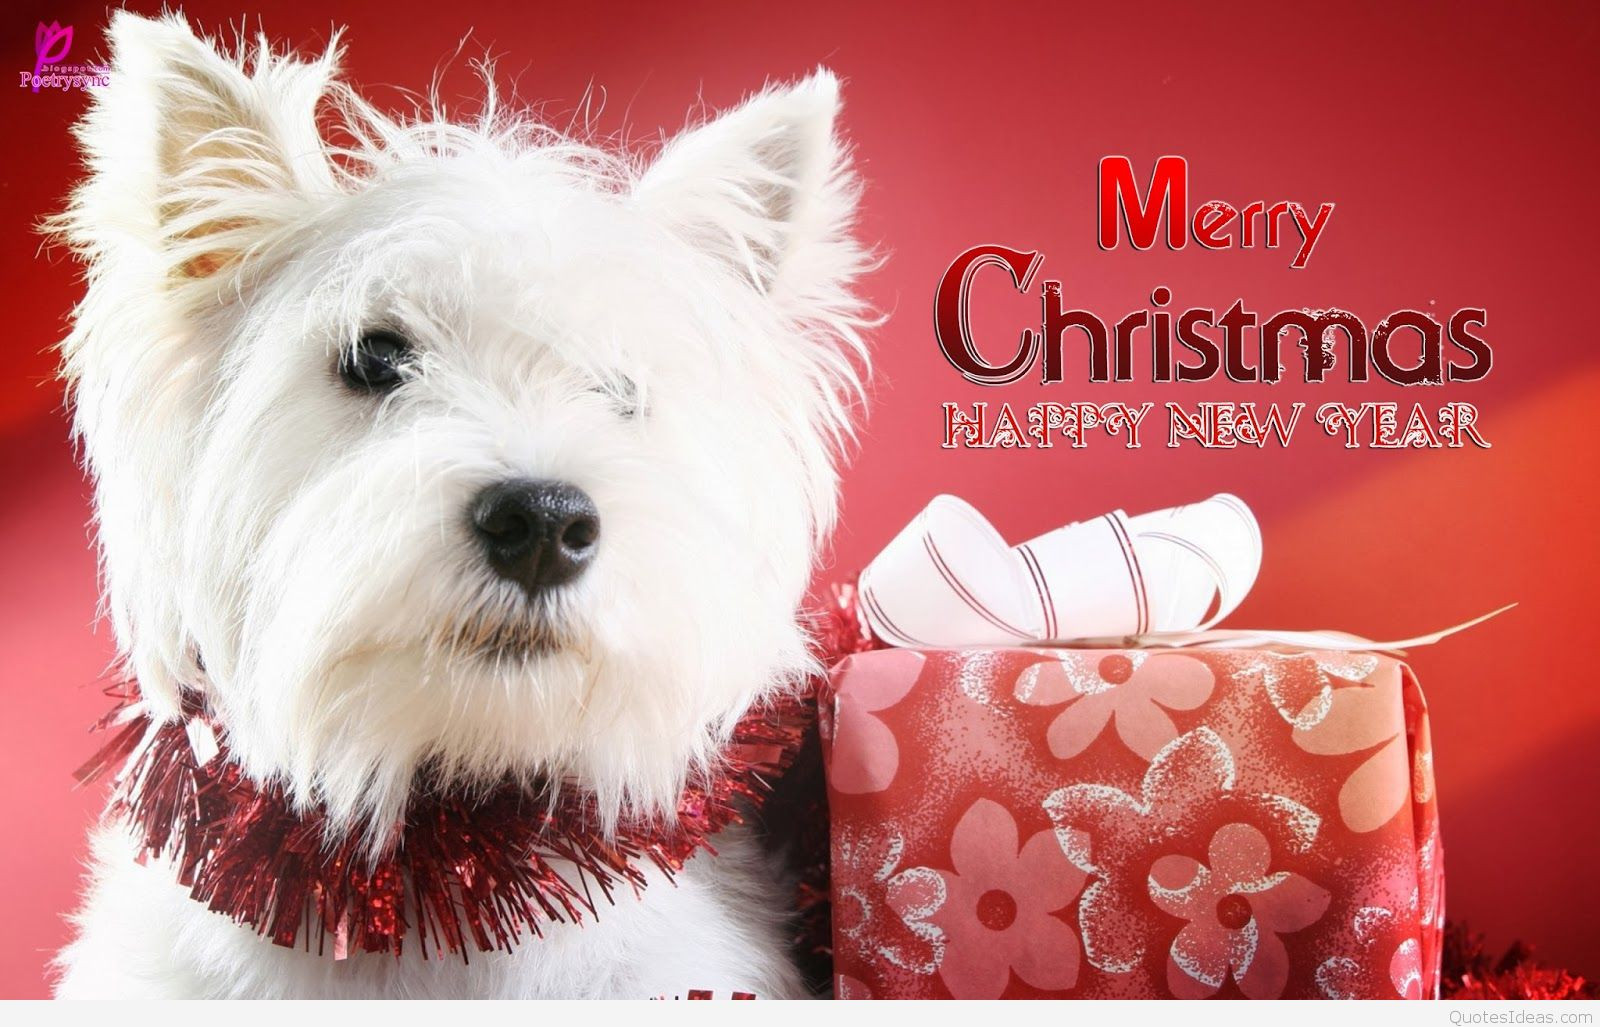 Christmas Dogs Quotes
 Funny Merry Christmas Sayings Messages & Cartoons 2015